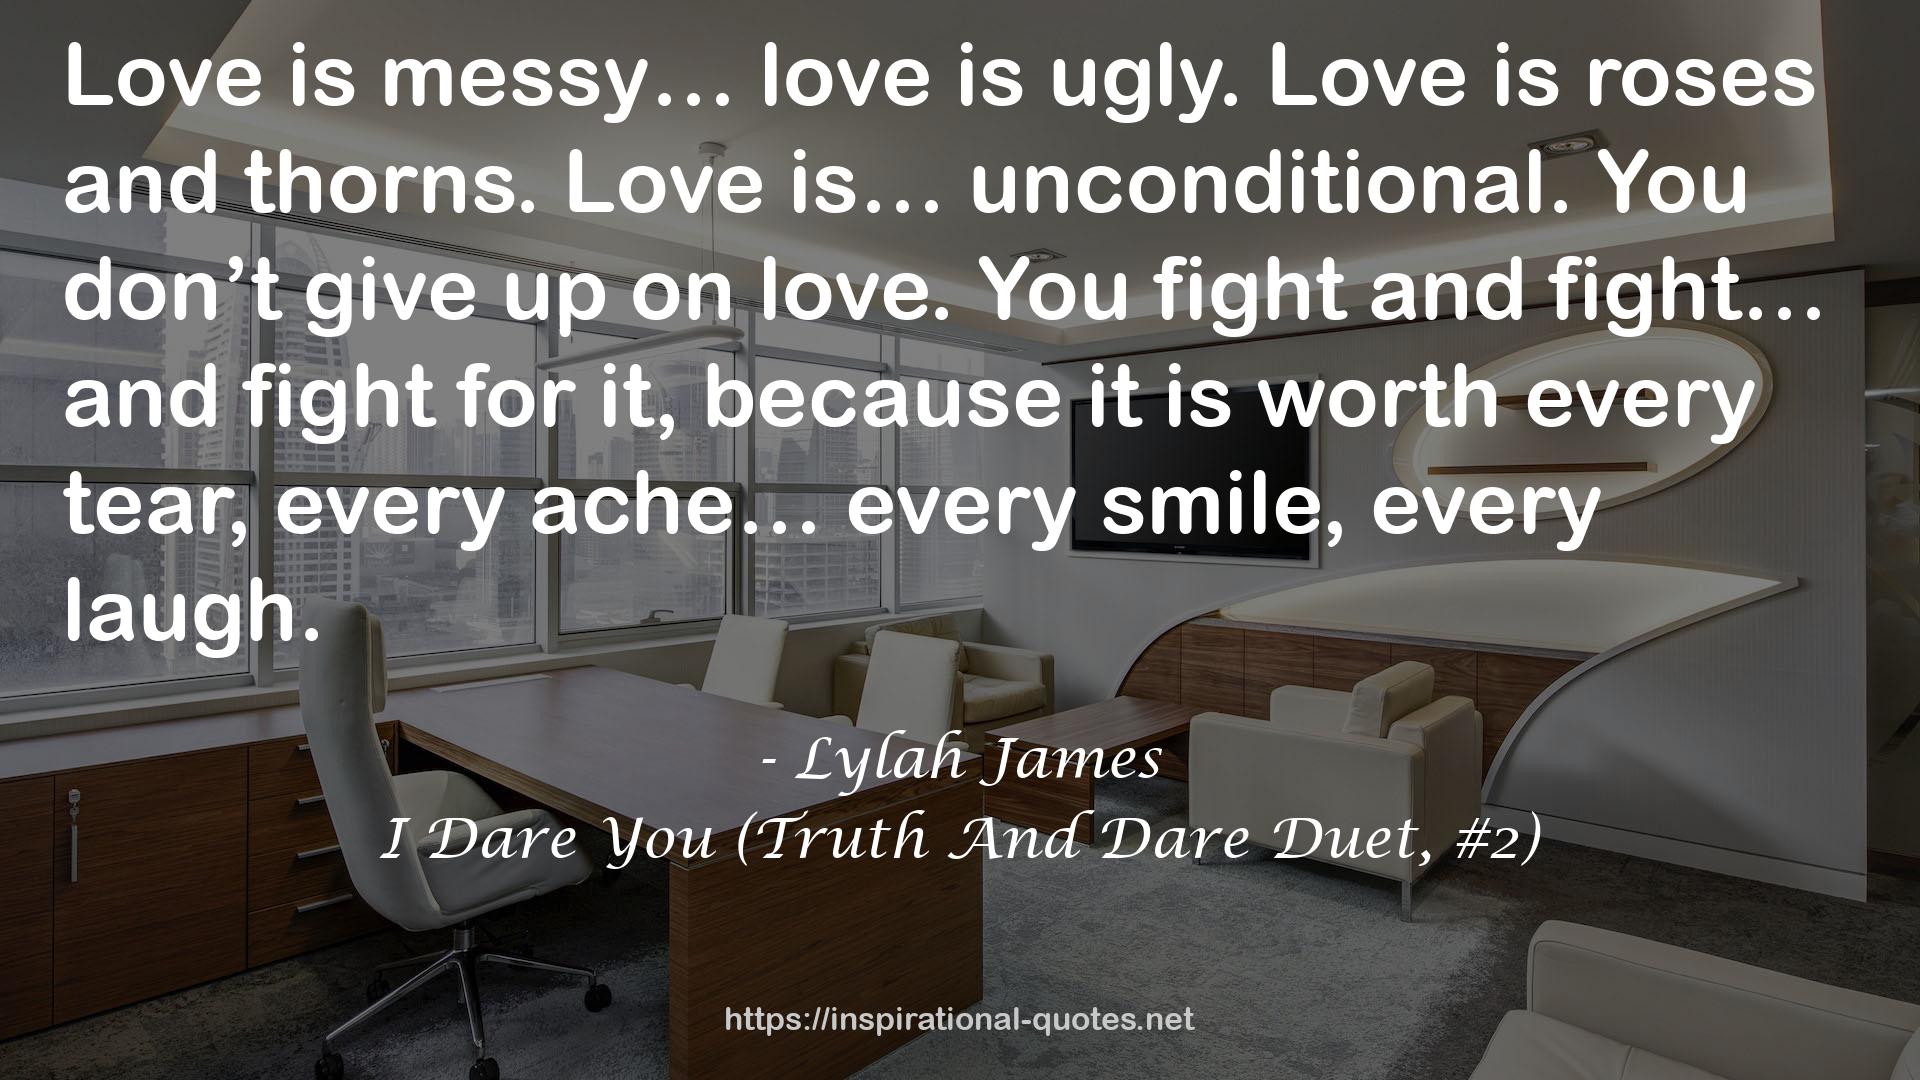 I Dare You (Truth And Dare Duet, #2) QUOTES